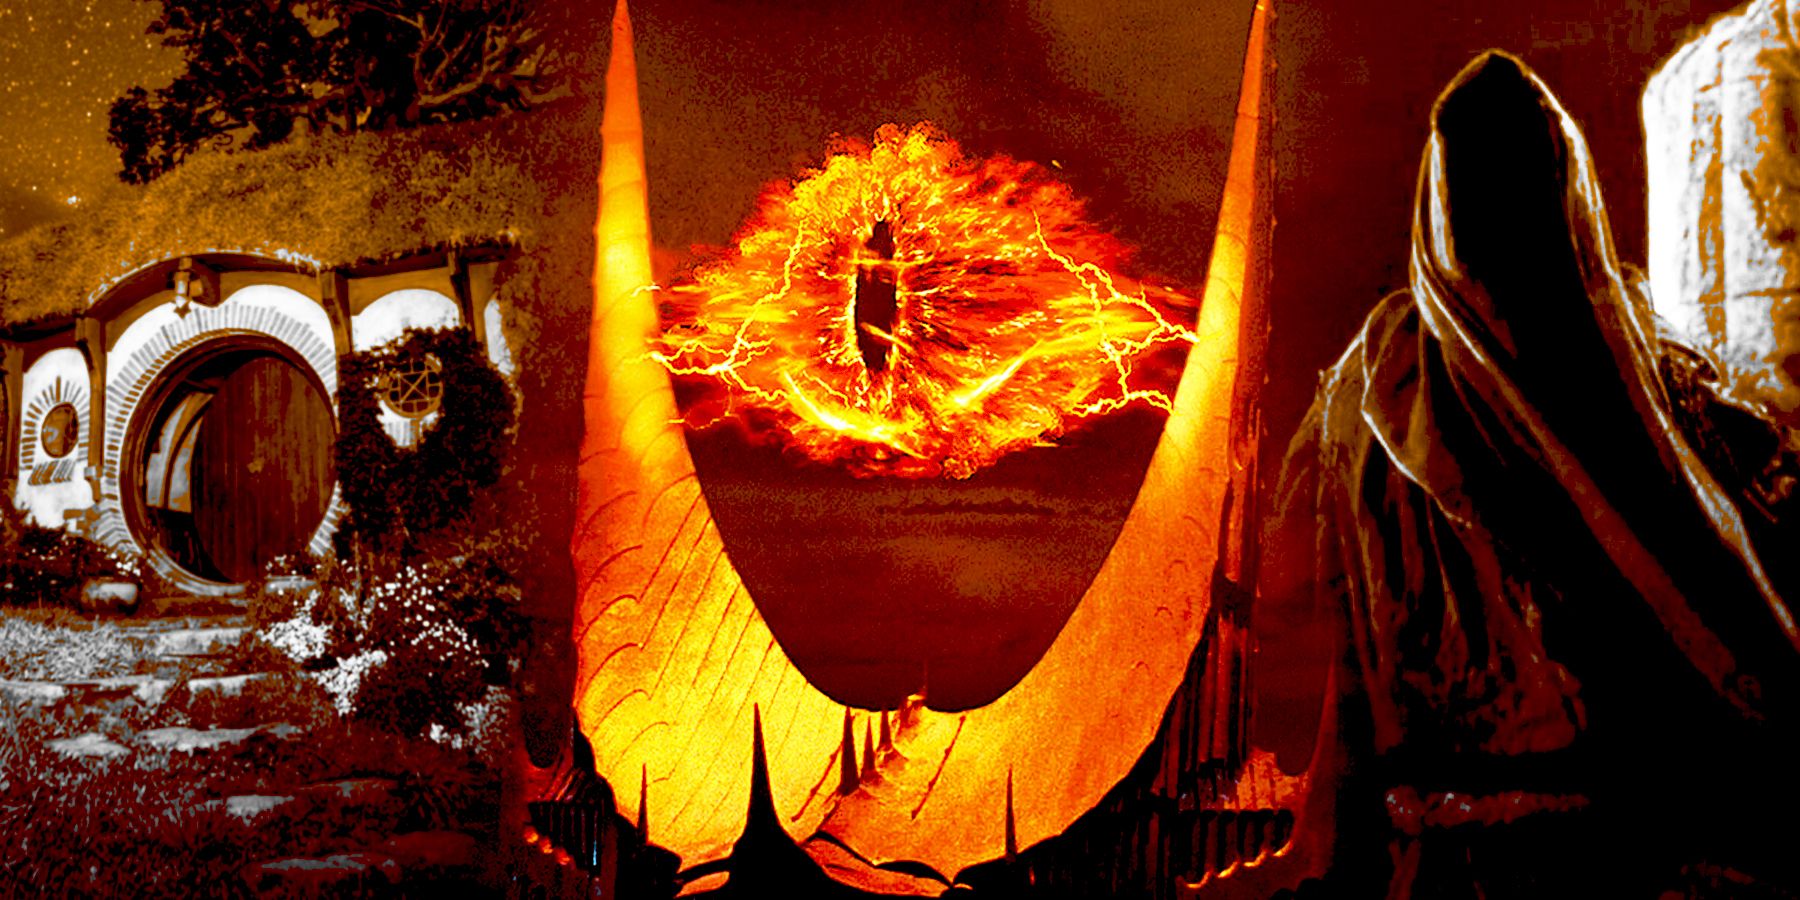 A composite image of a house in the Shire, the Eye of Sauron and a Ringwraith